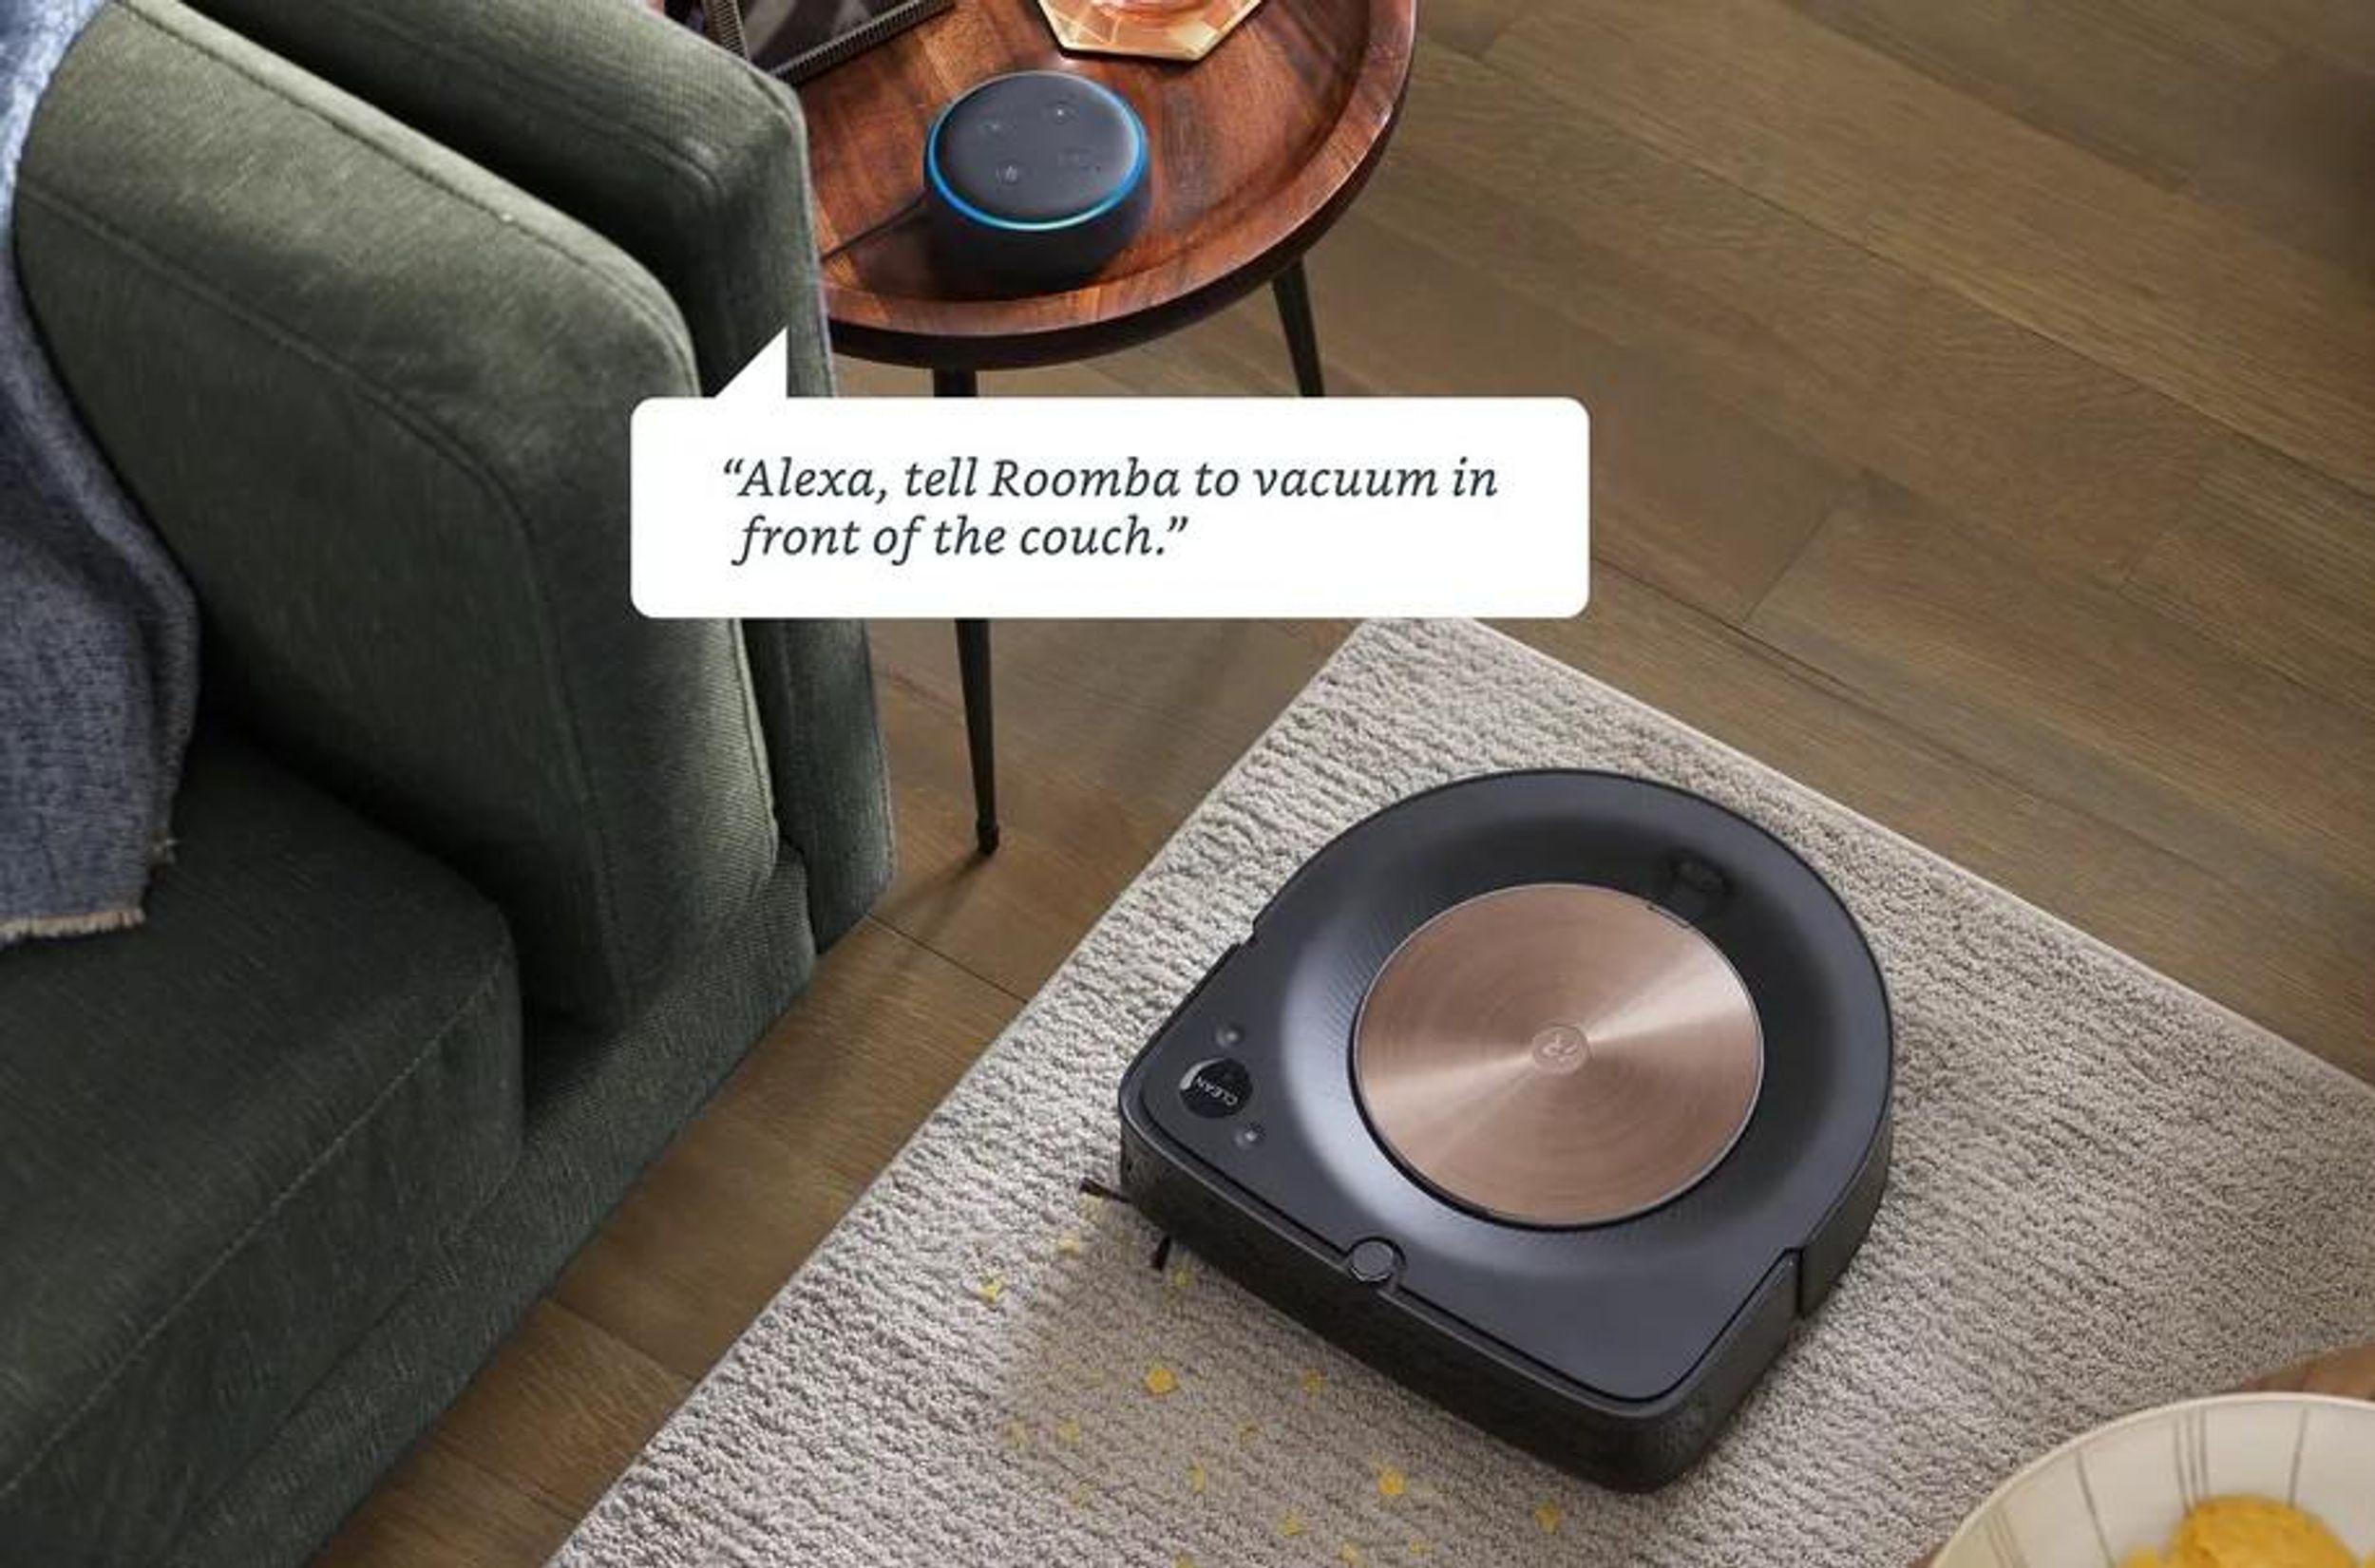 A robot vacuum cleans a dirty carpet while an Amazon Alexa on a nearby table provides instructions